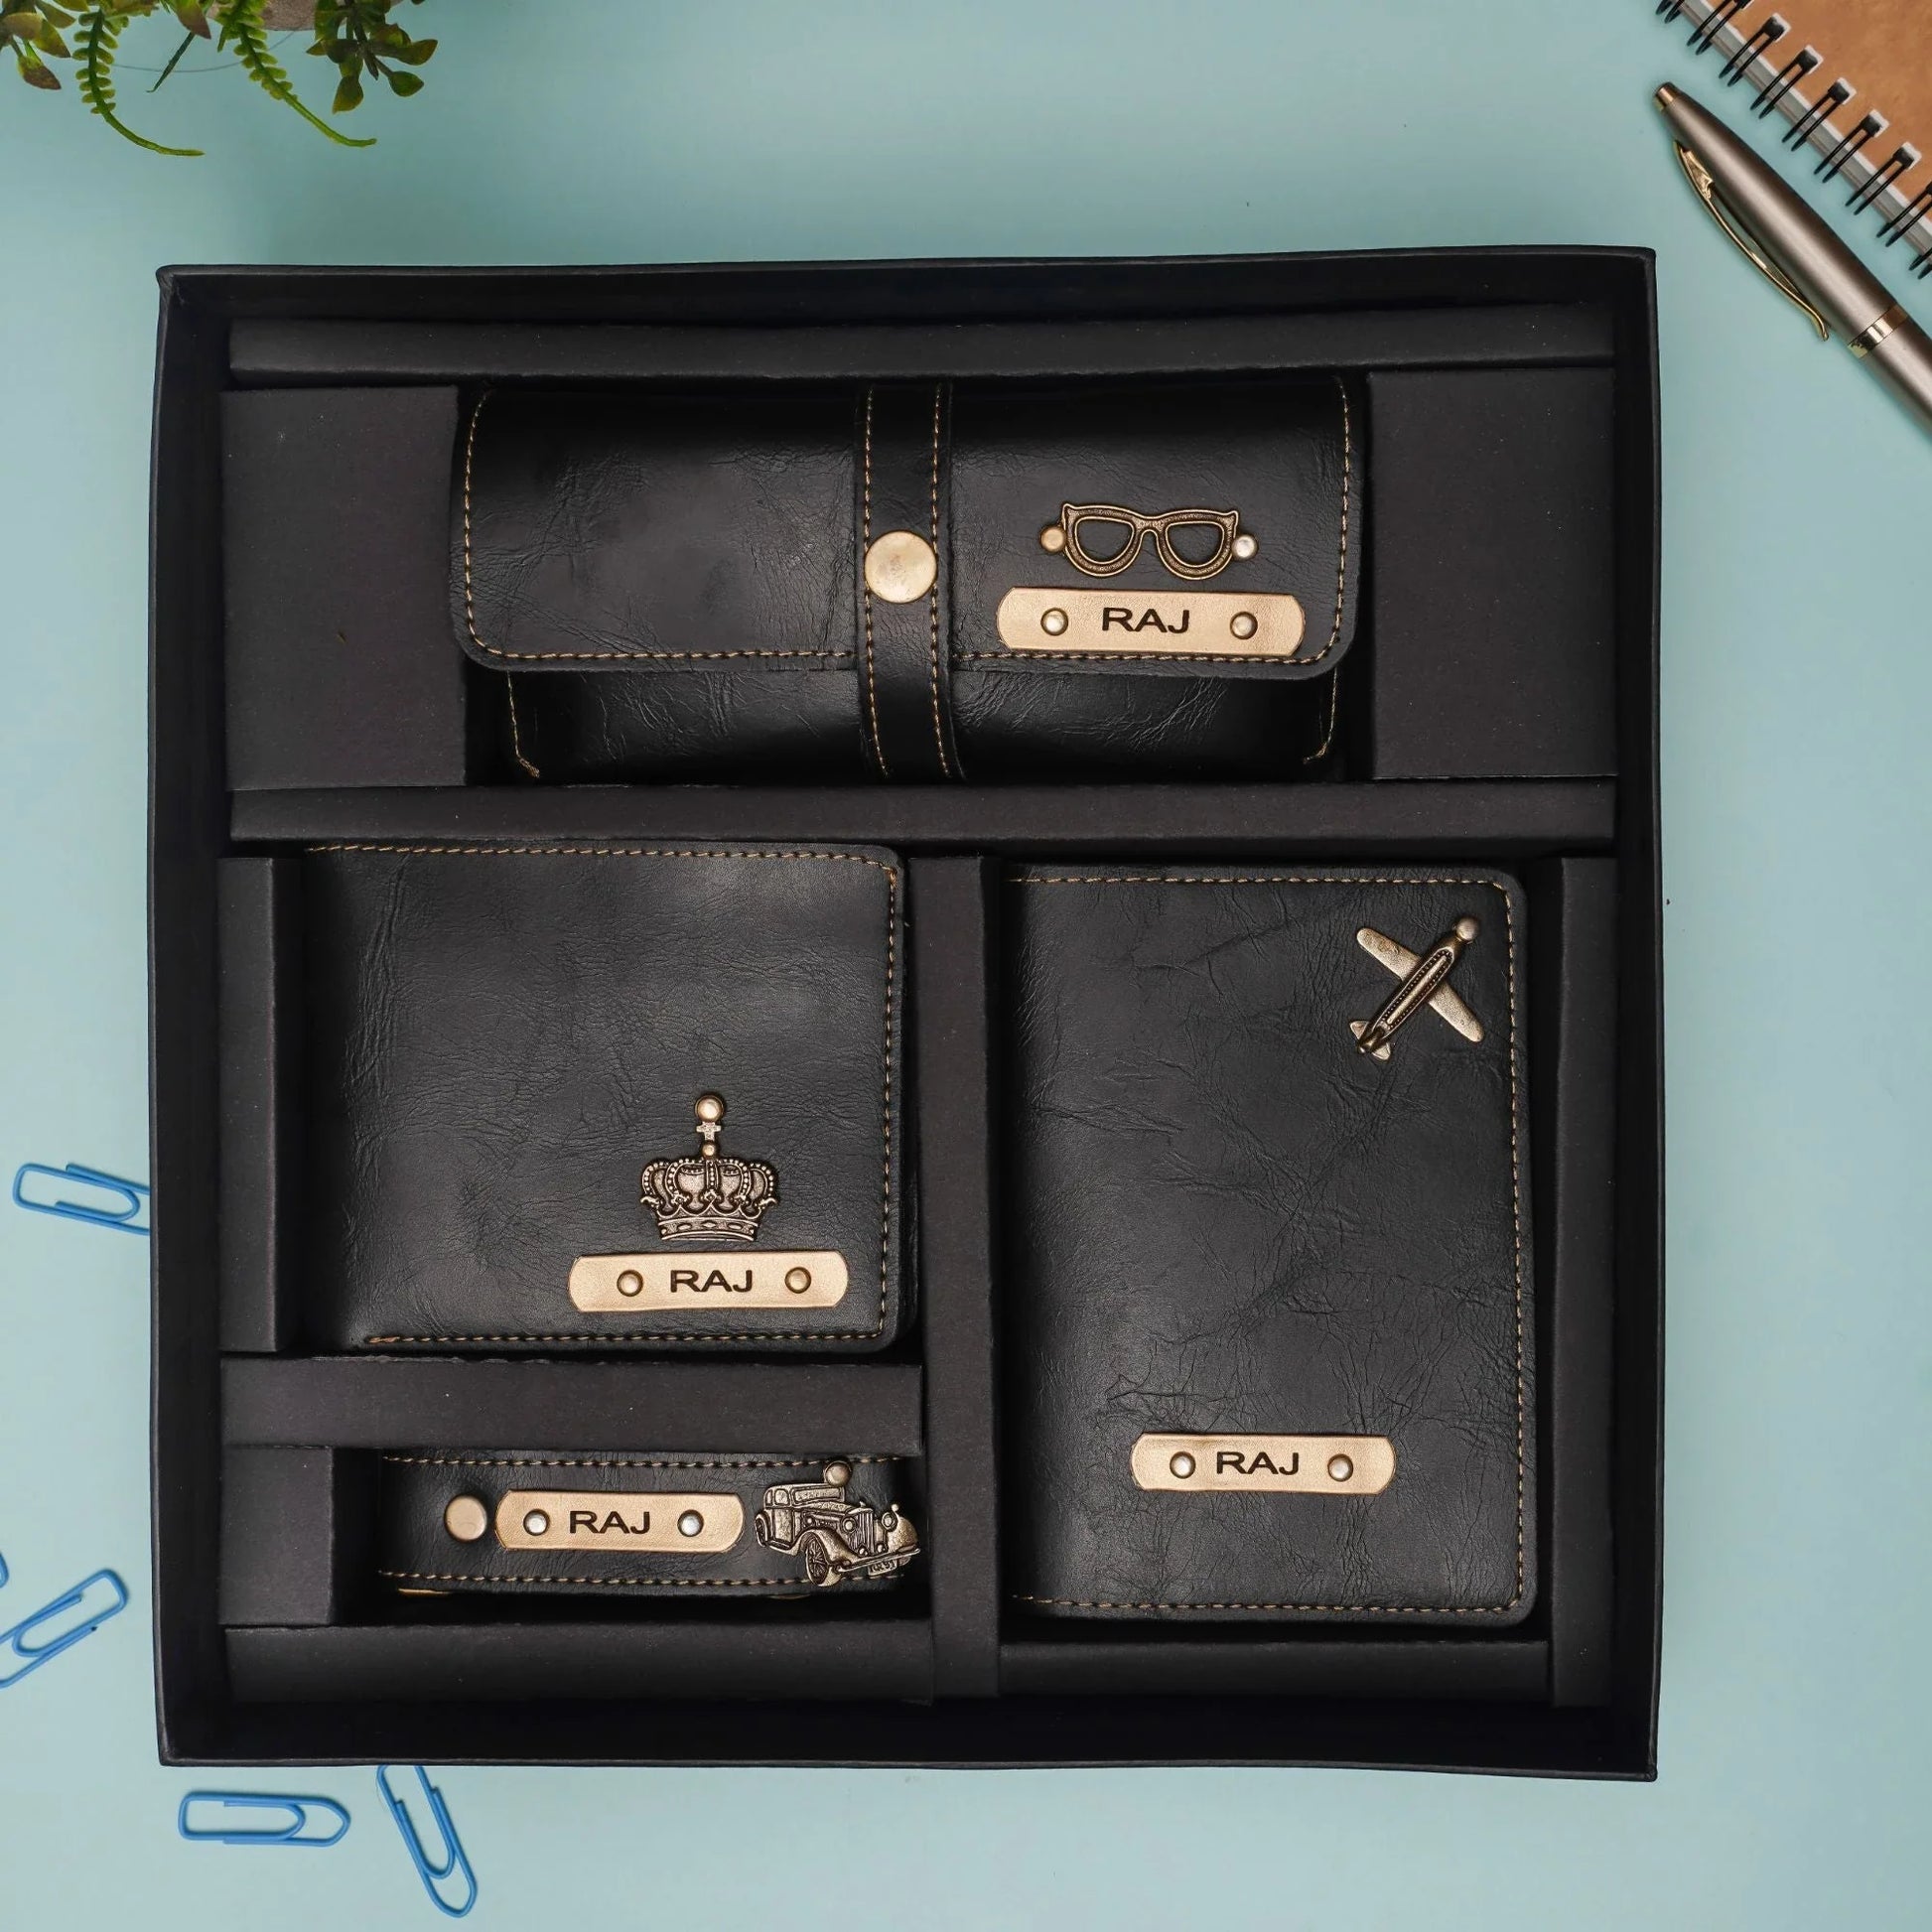 Make a style statement with our customized men's combo! This carefully curated set includes a leather wallet, passport case, sunglasses case and keychain, both of which can be personalized with your choice of initials, monogram or design.